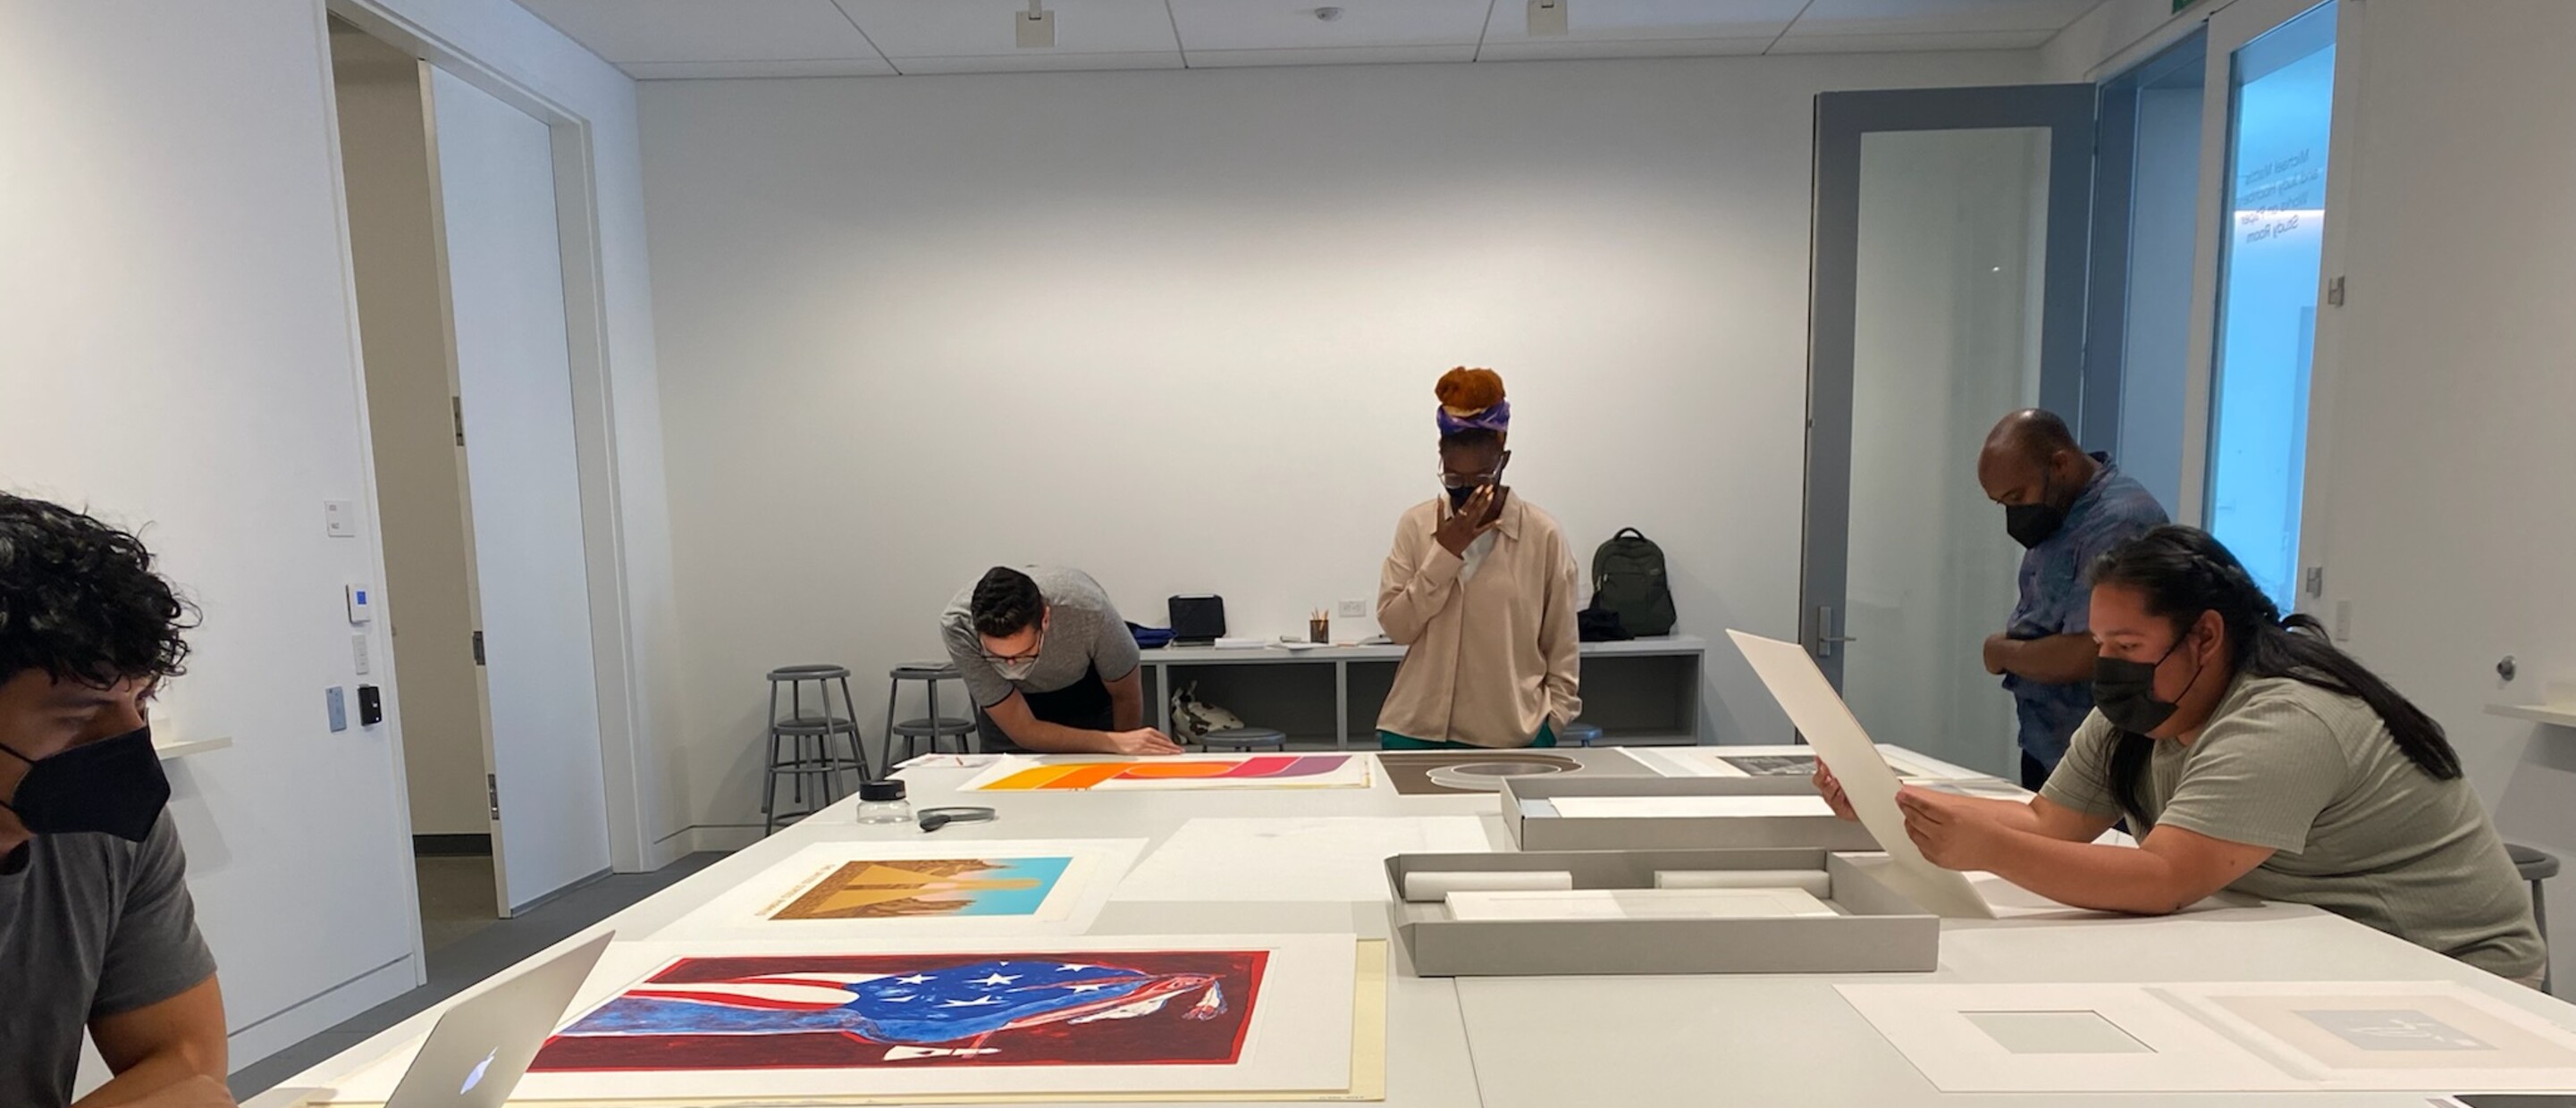 5 people looking at prints on a large table